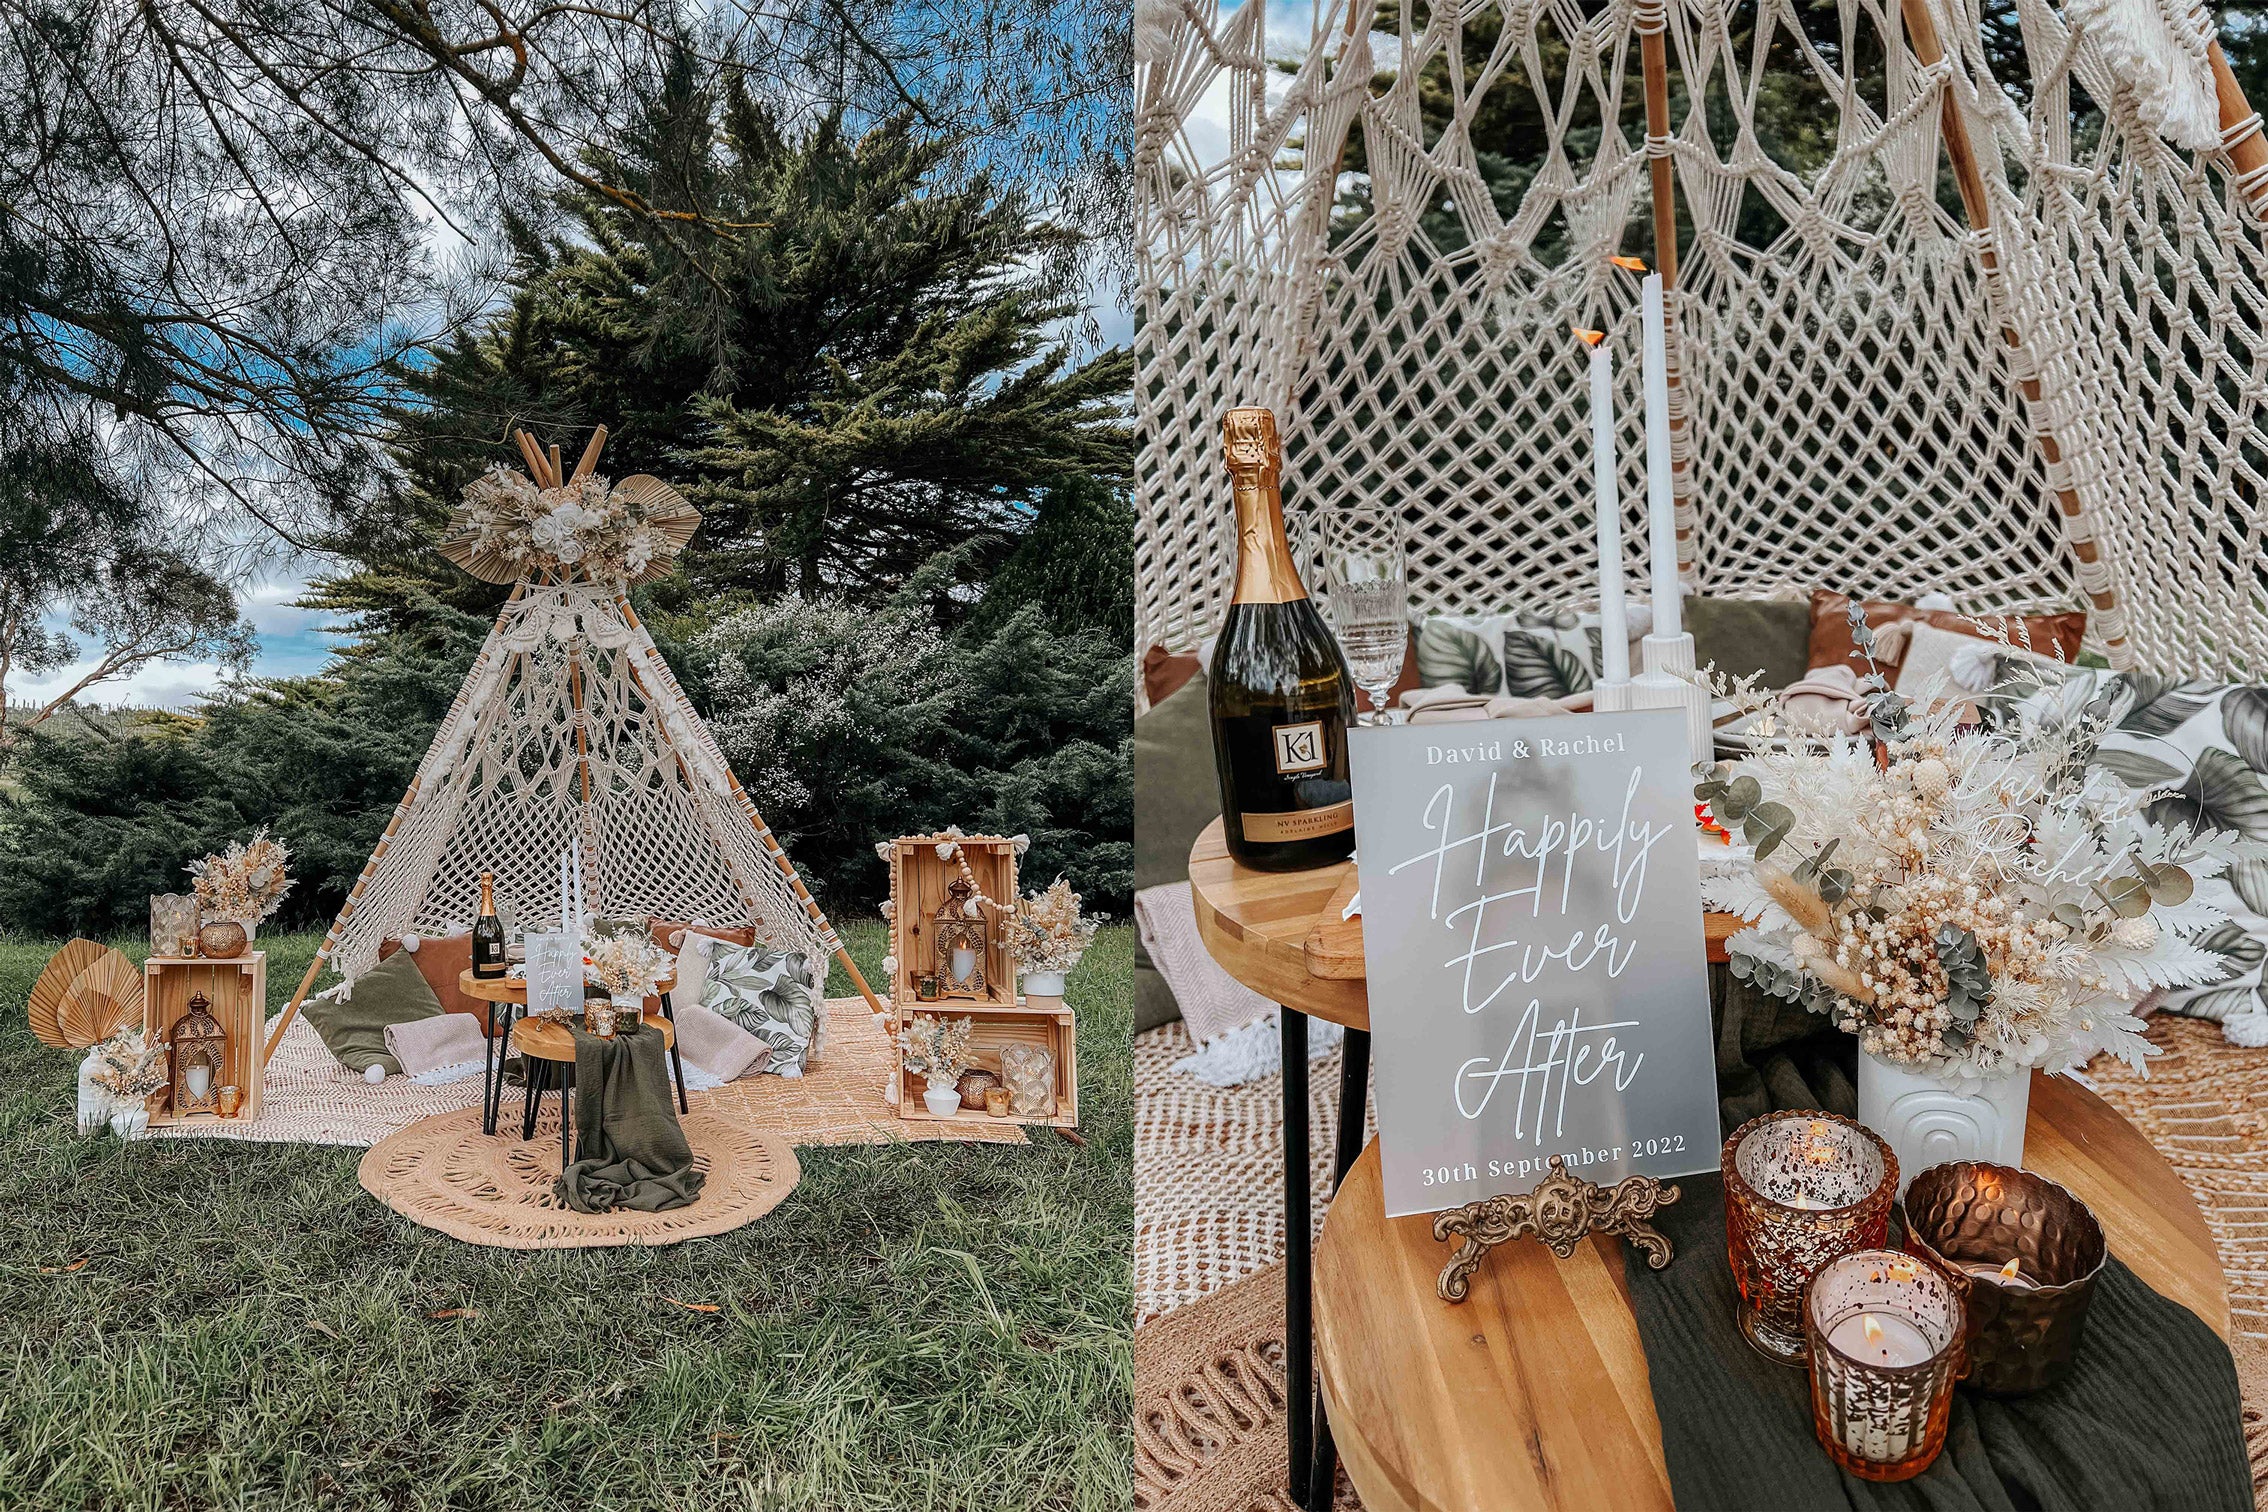 Teepee picnic proposal with shades of green, tan, and neutrals